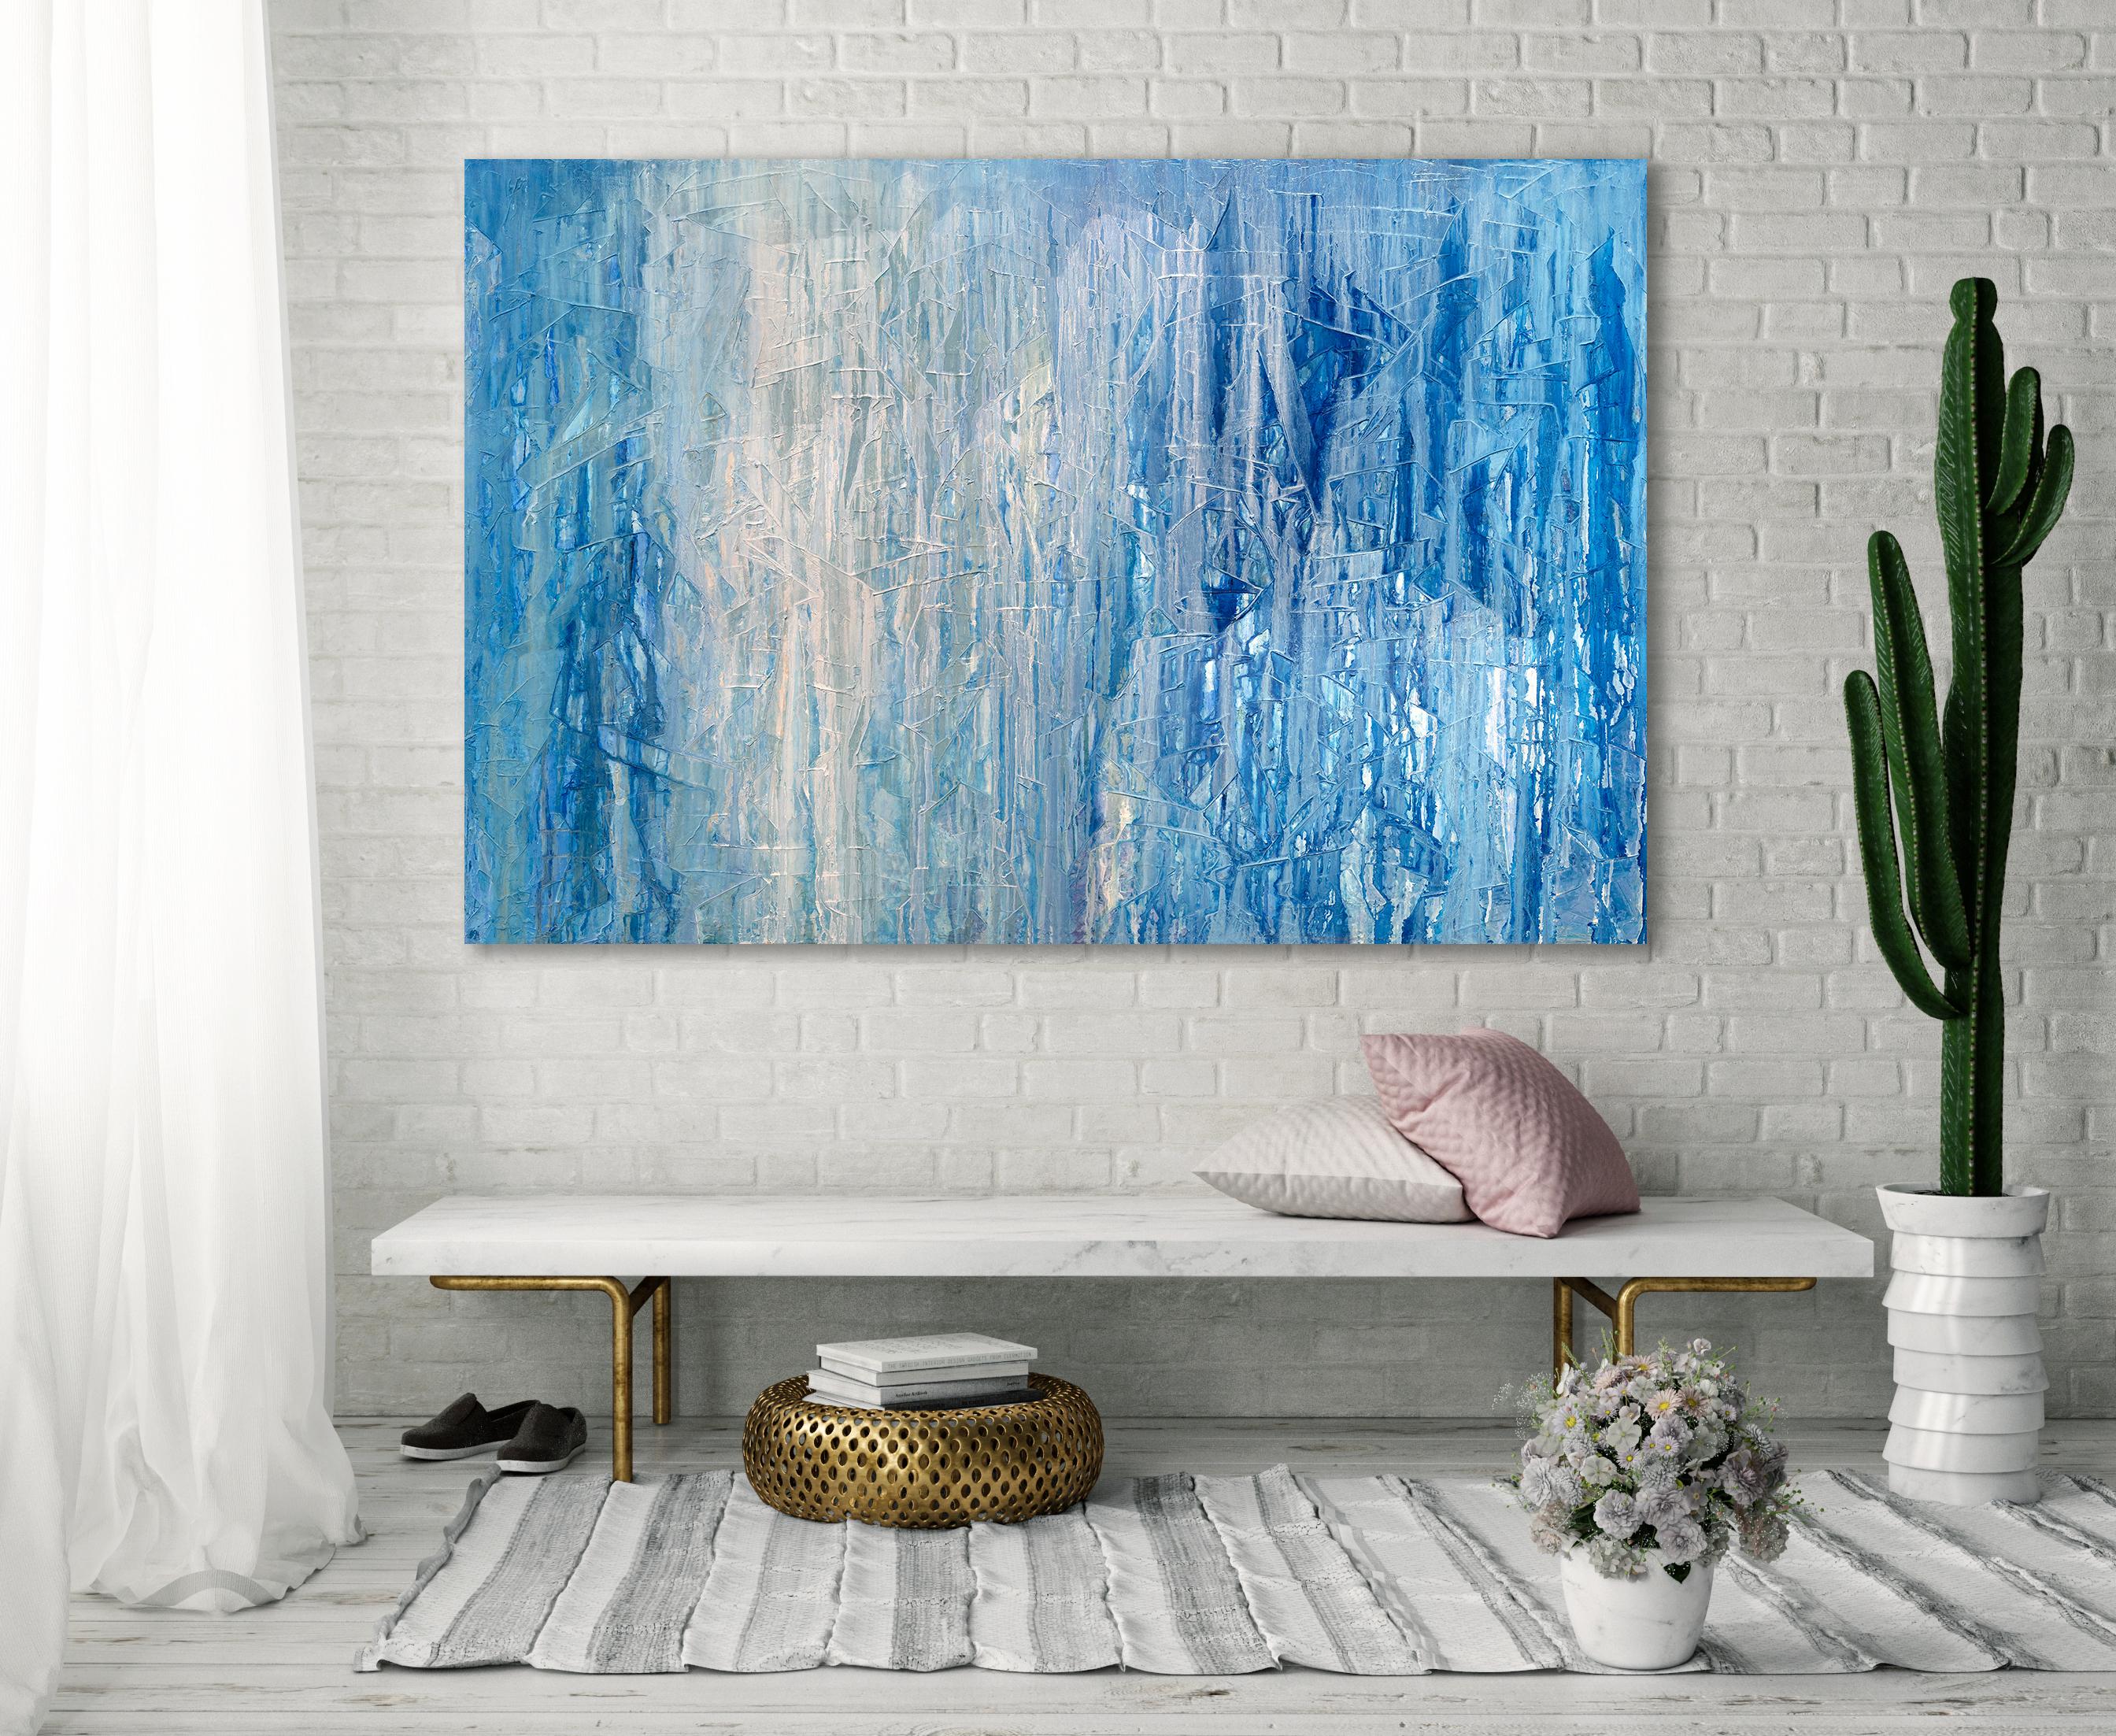 This large abstract painting by Teodora Guererra features a blue and white palette. Paint appears to drip over a textured under layer of the painting. It is created with oil paint on gallery wrapped canvas, and has clean, platinum painted sides. It